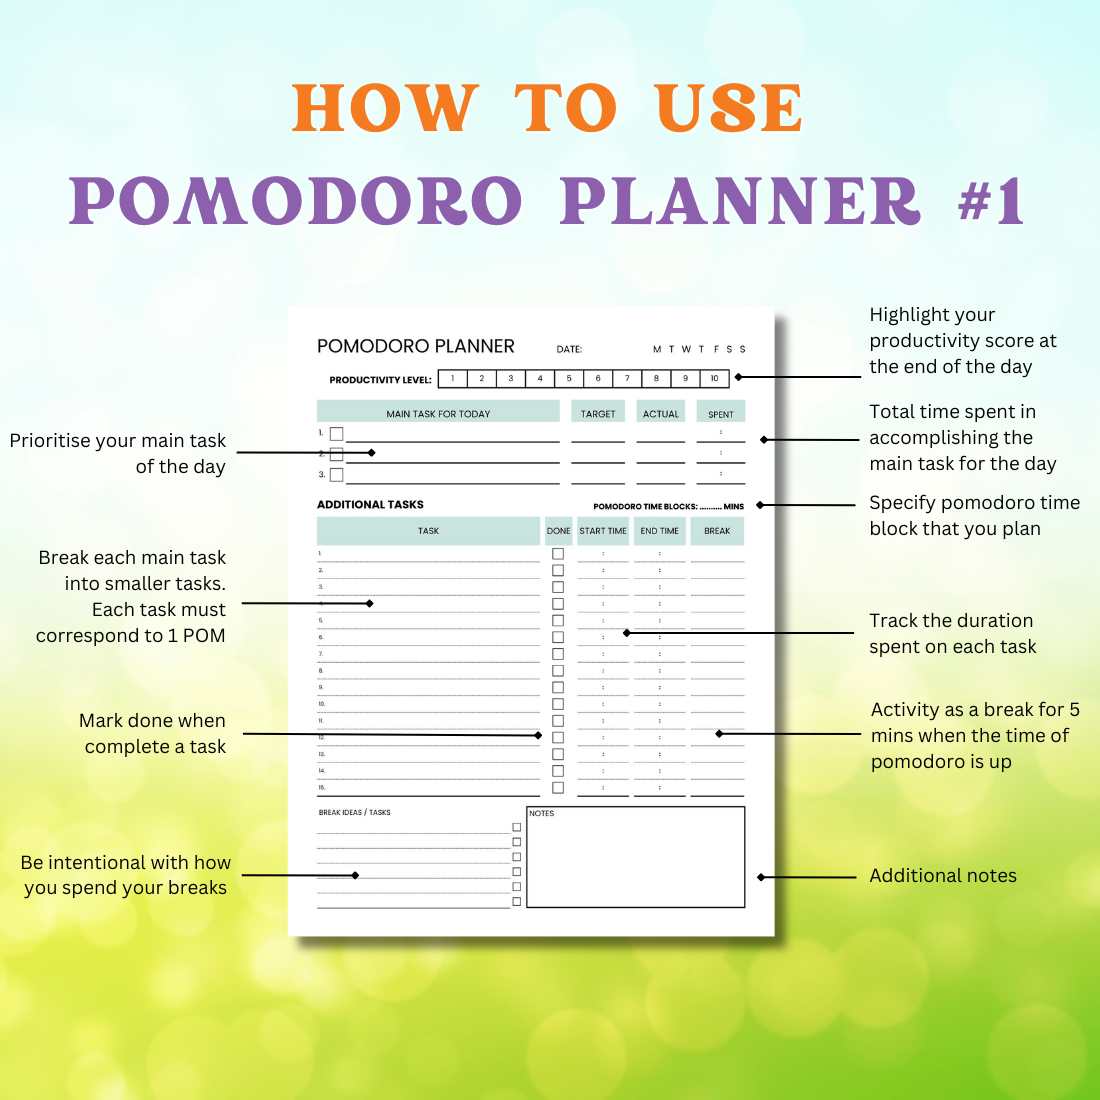 Pomodoro Planner & Tracker preview image.